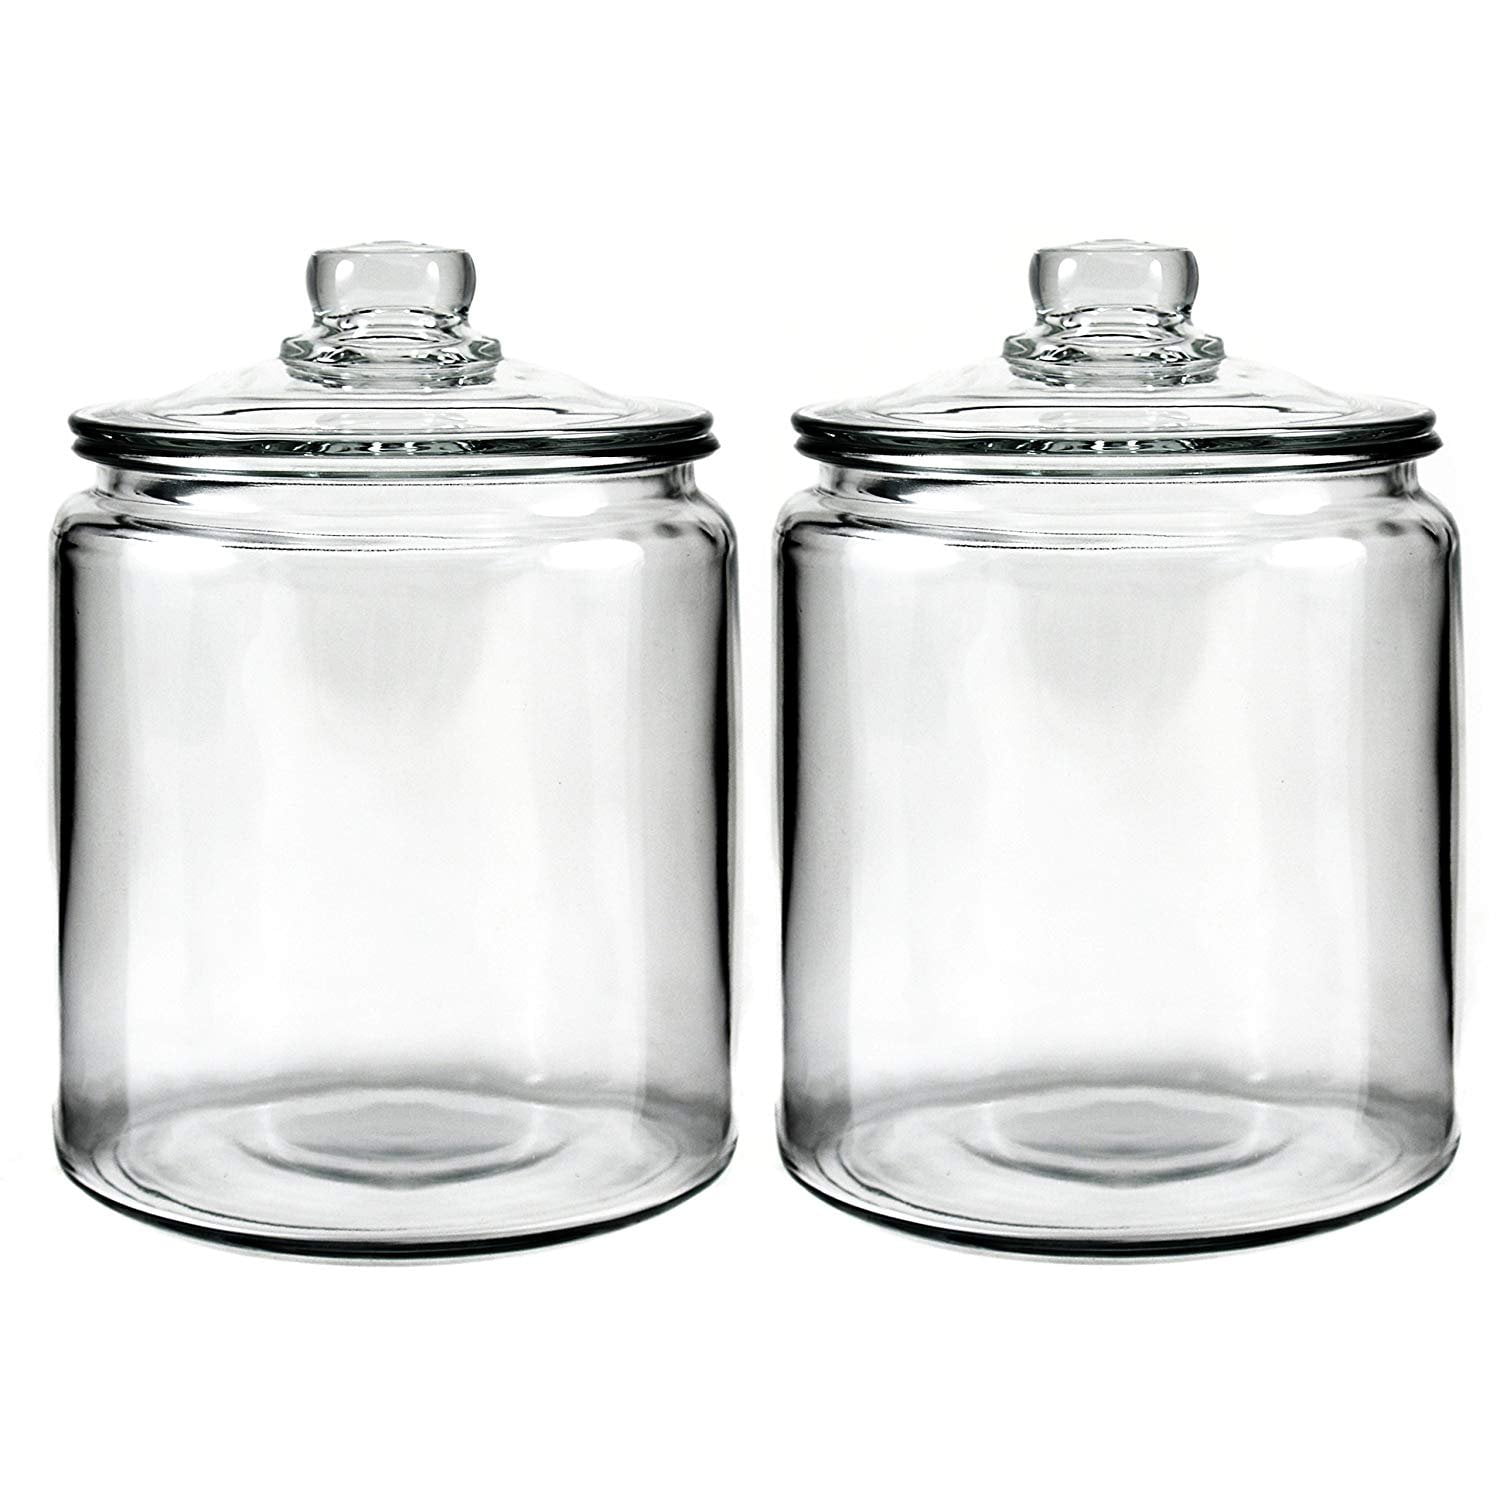 Anchor Hocking Heritage Hill Glass Jar with Lid, 2 Gallon